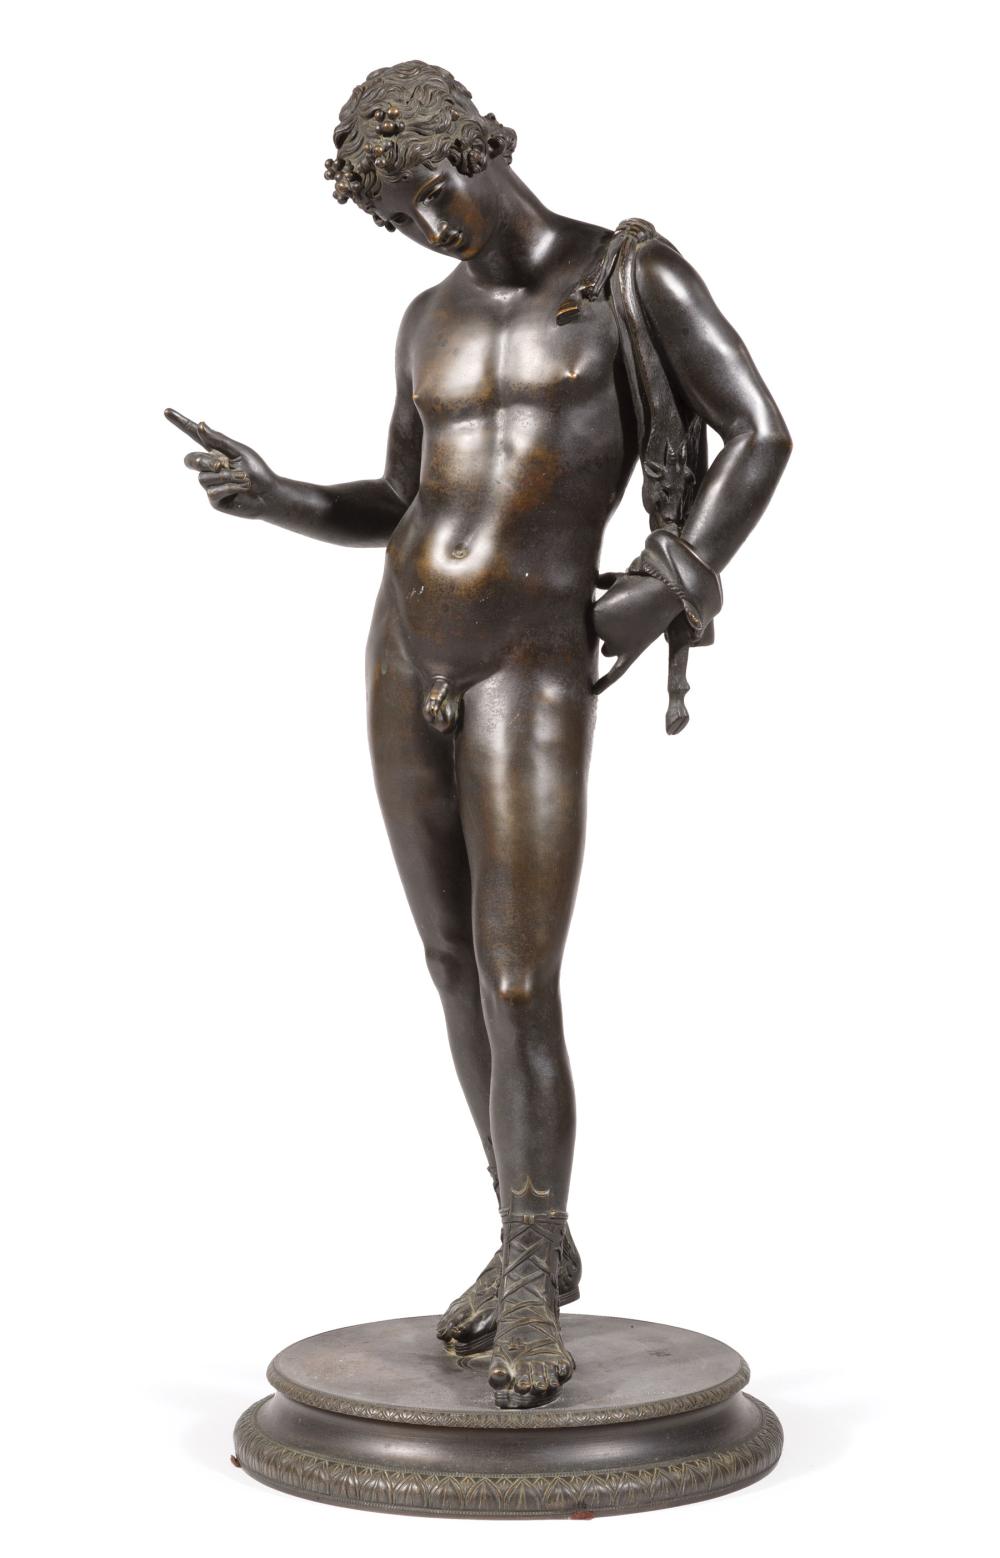 BRONZE FIGURE OF "NARCISSUS OR